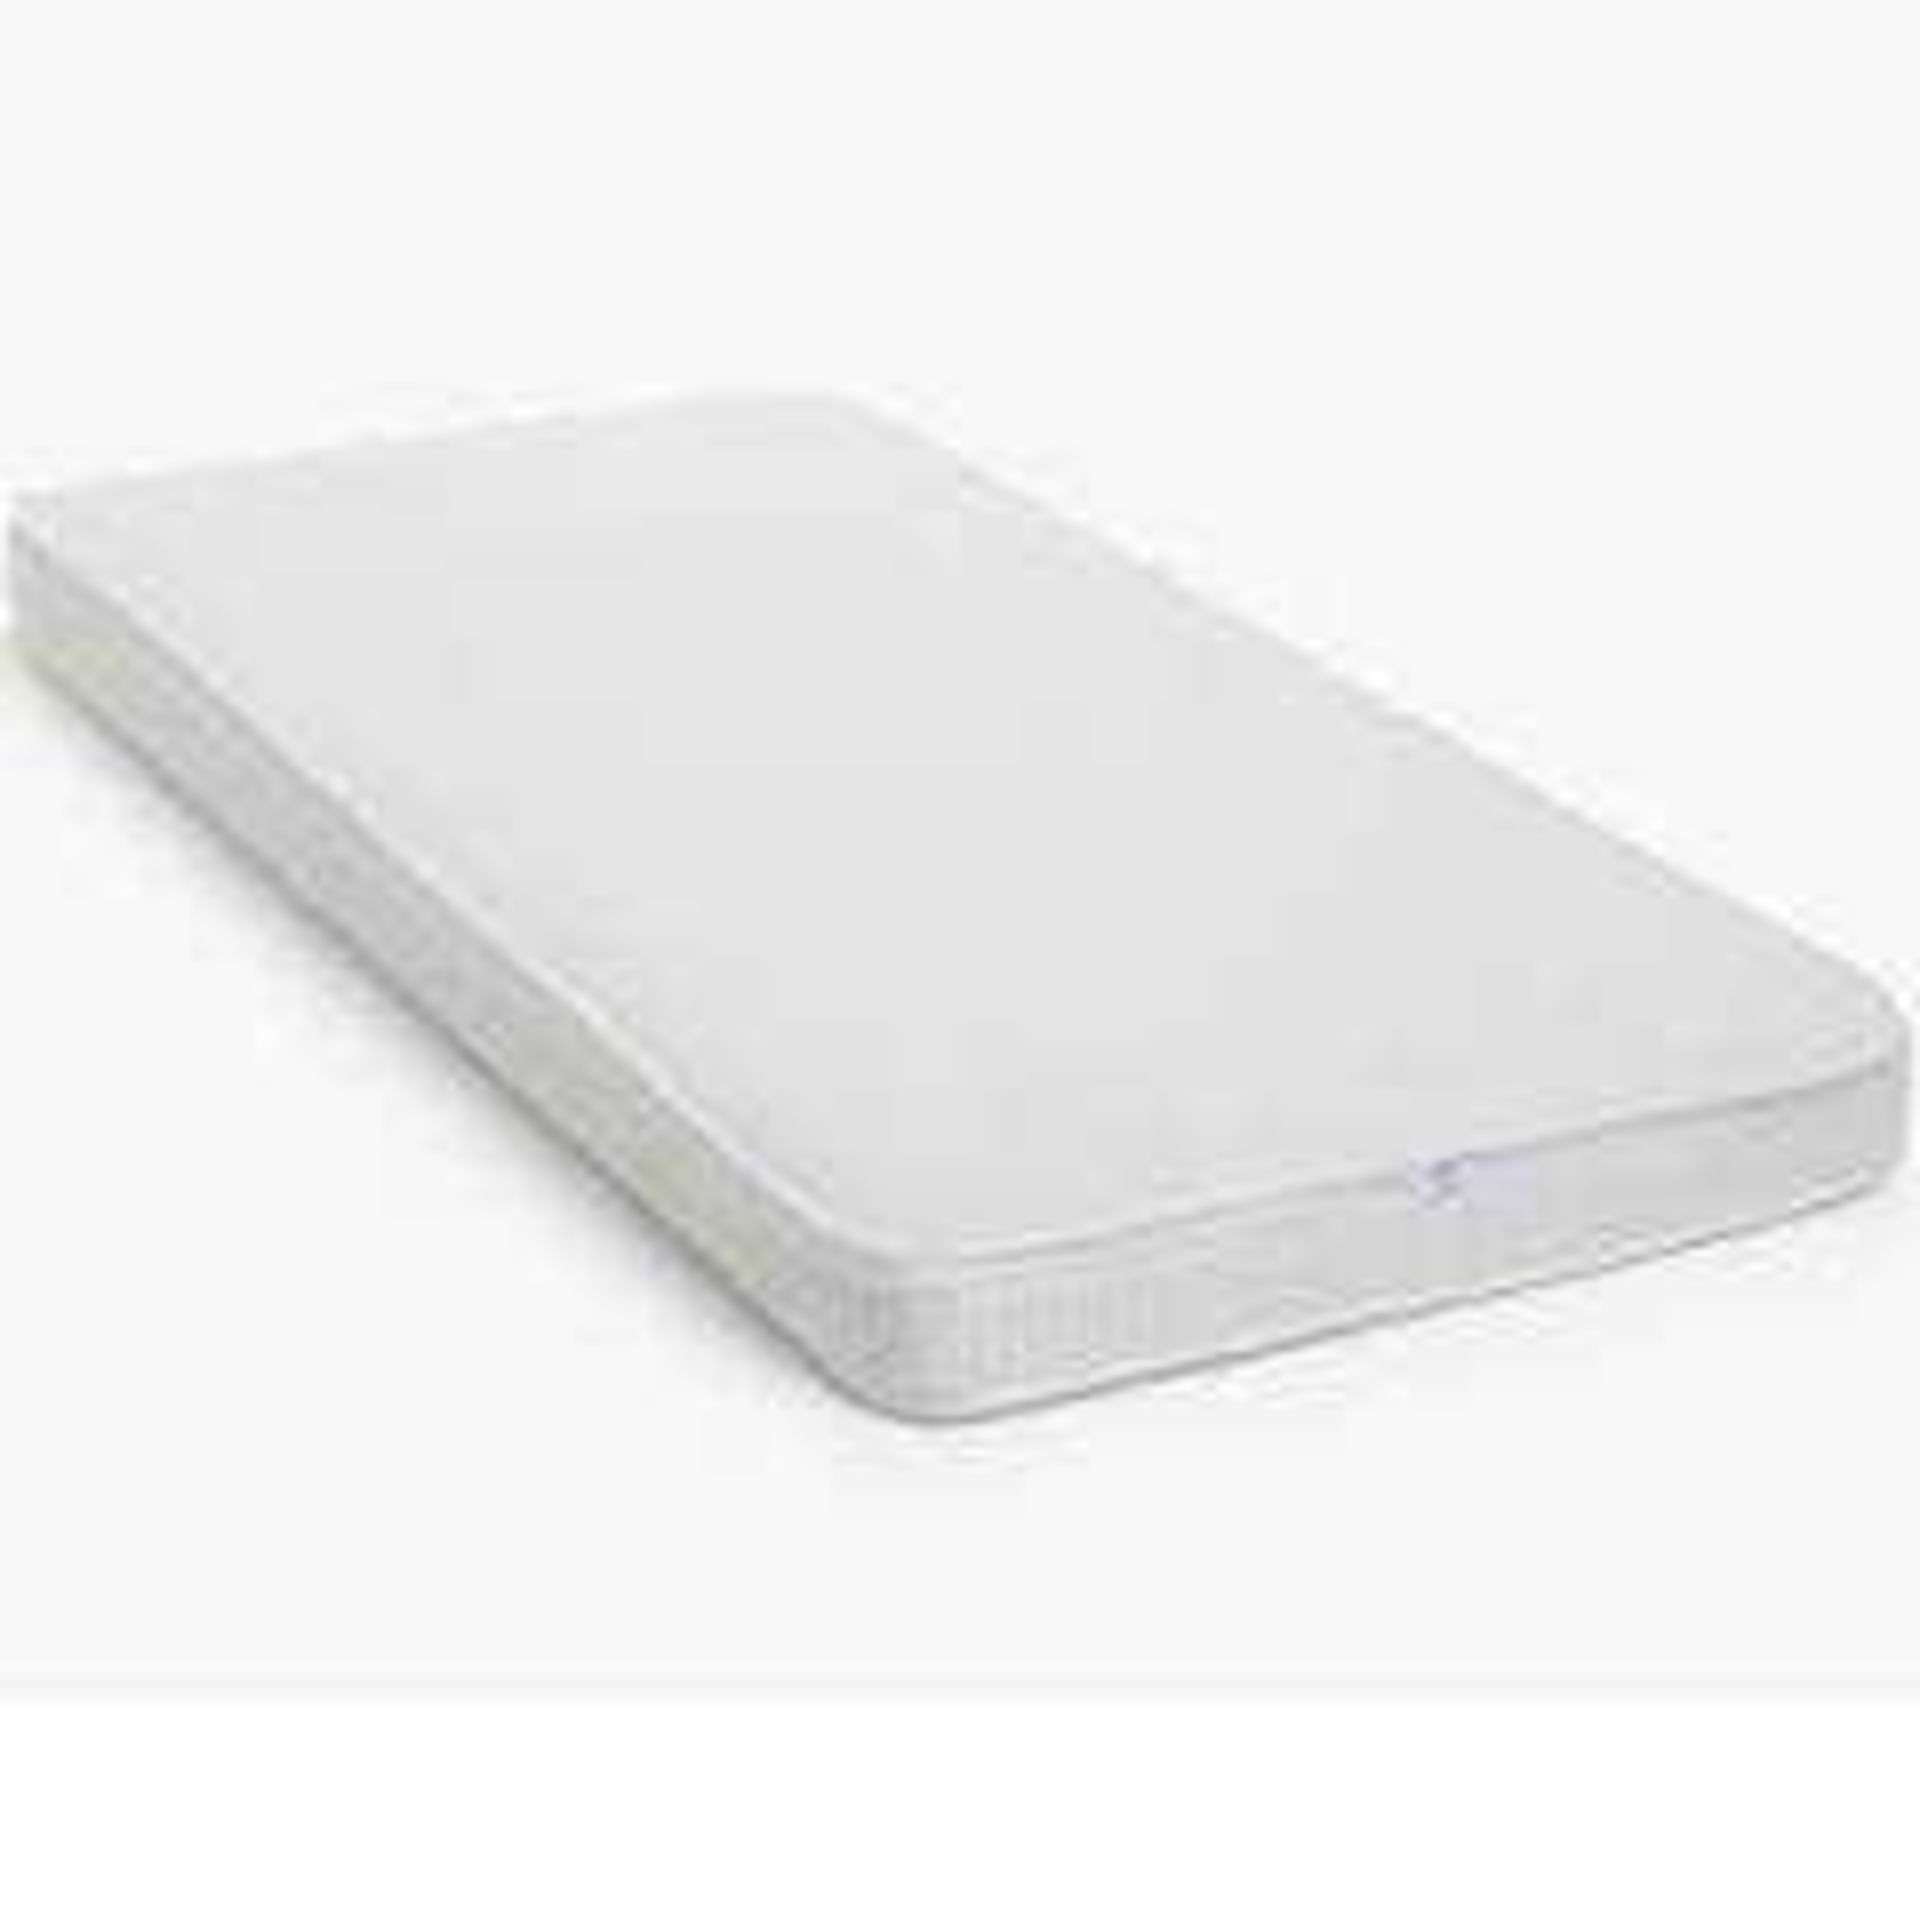 RRP £75 Bagged John Lewis Designer Cot Bed Mattress (Appraisals Available On Request) (Pictures